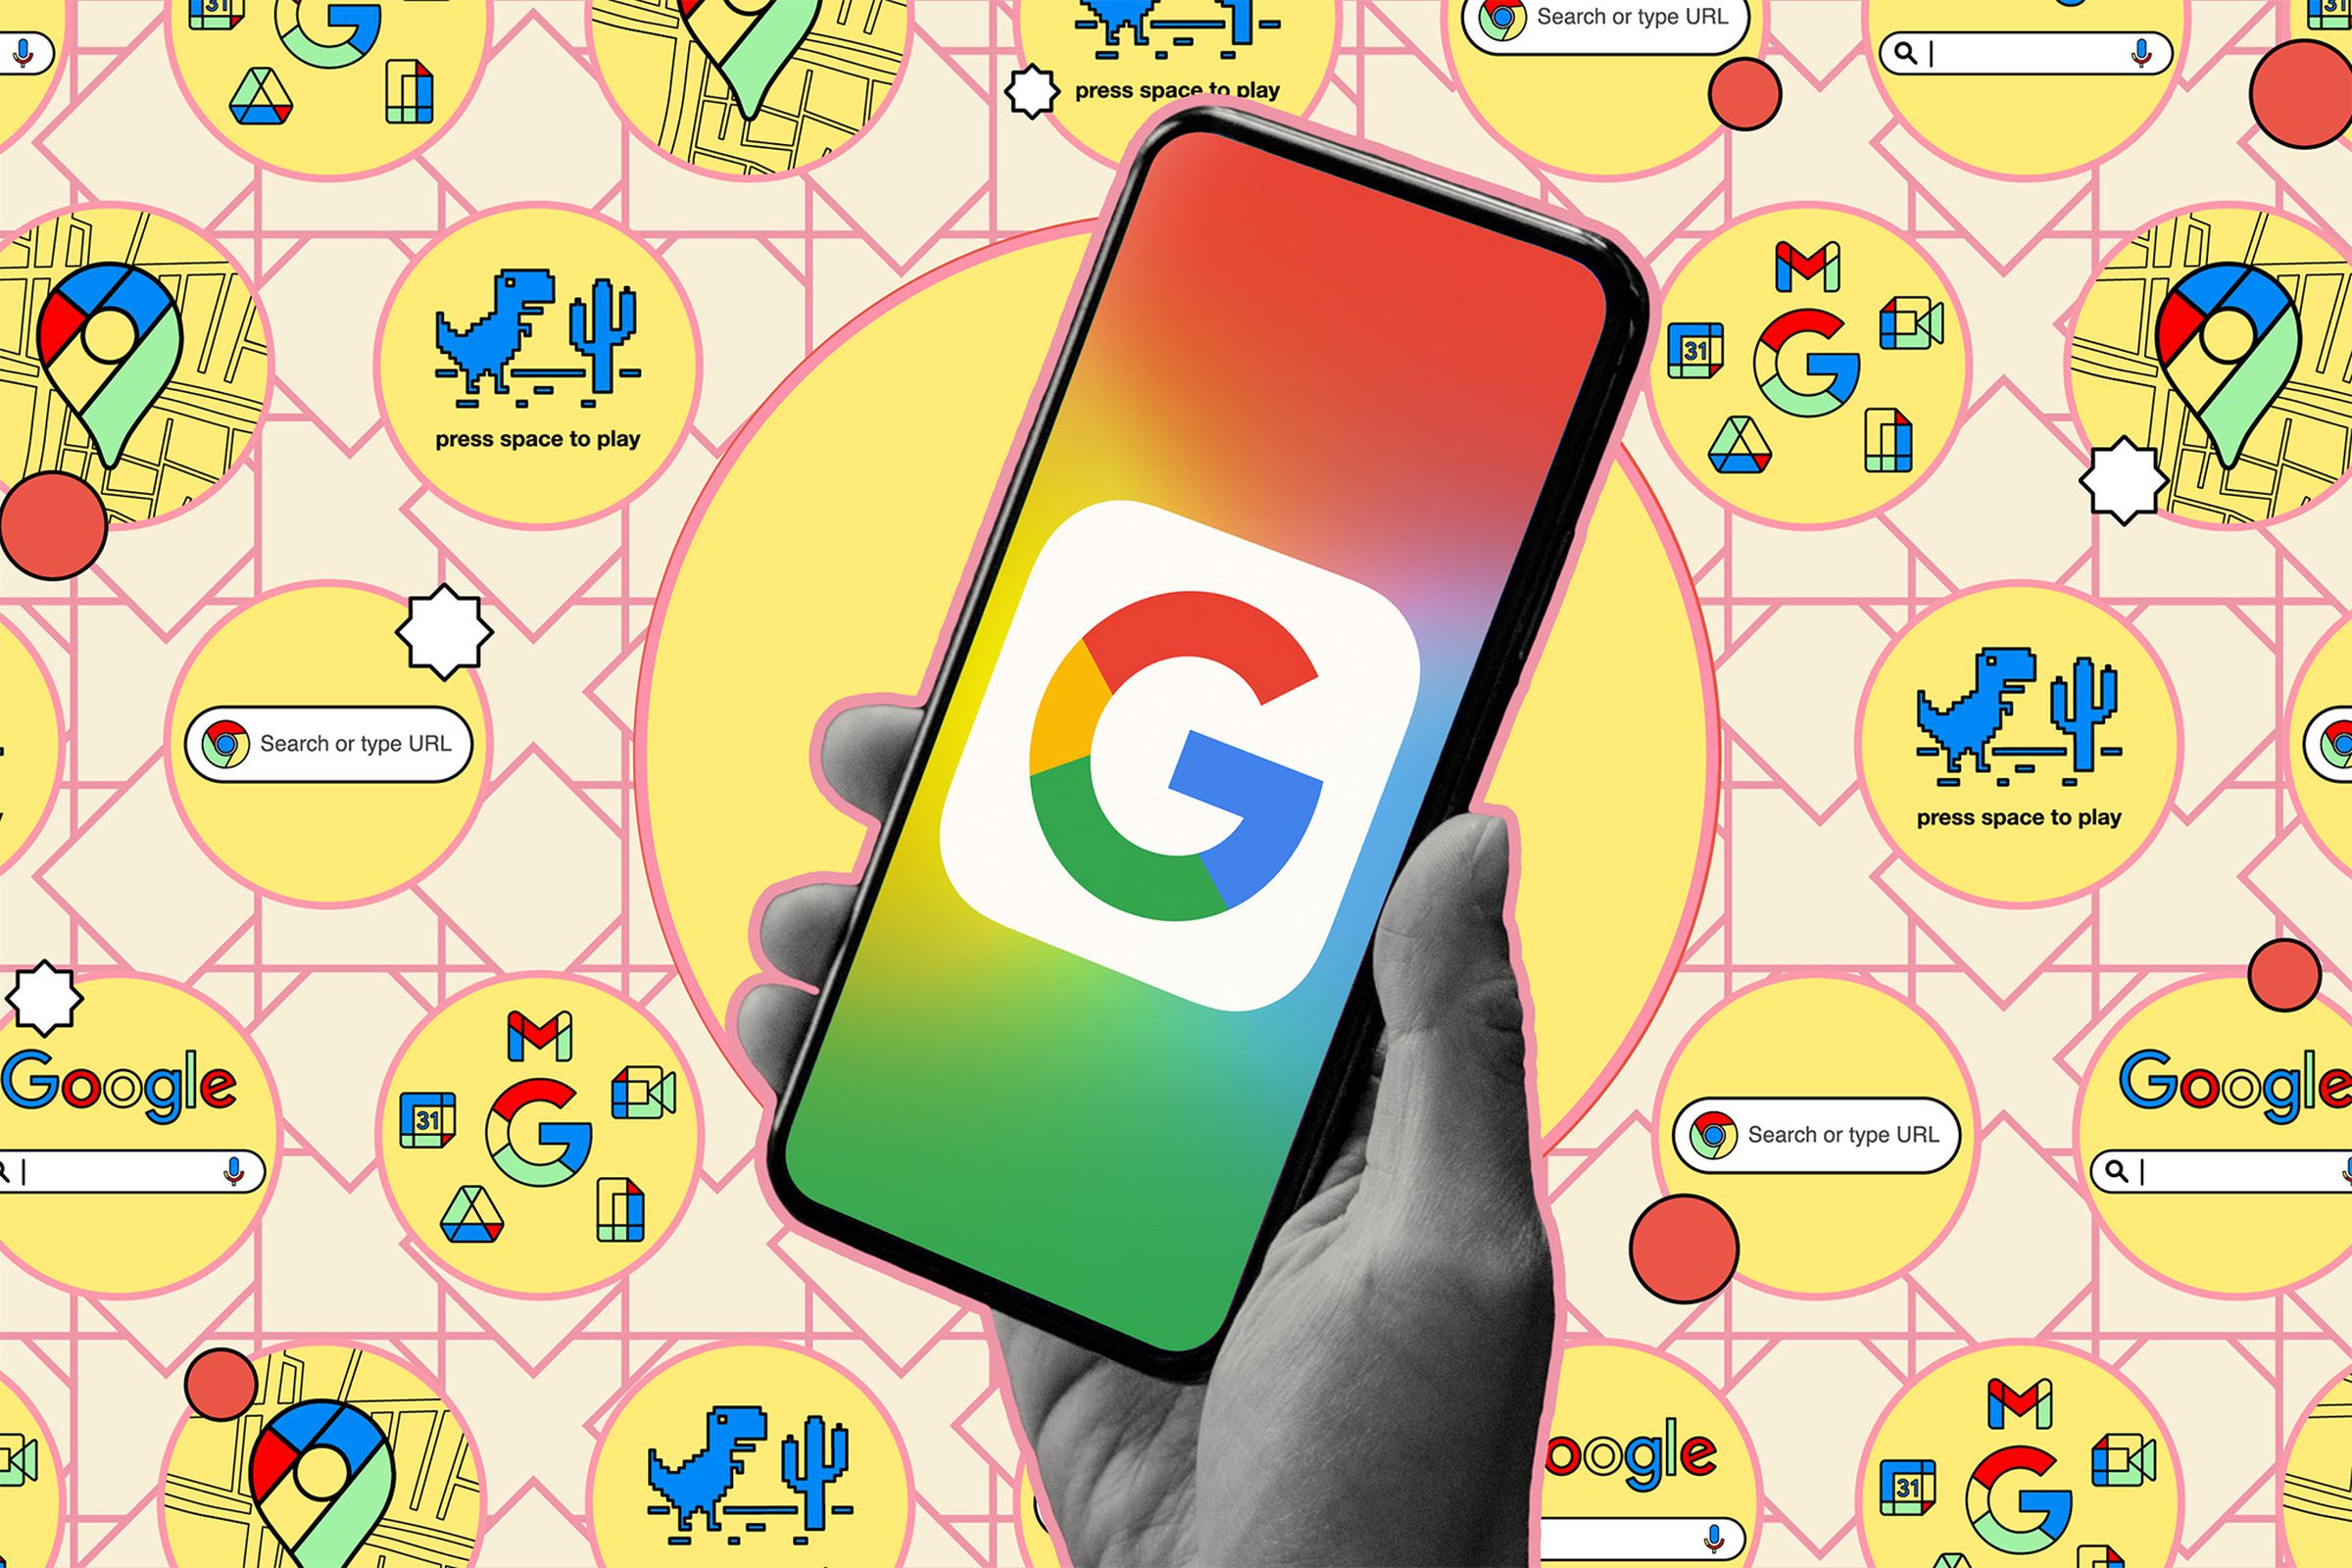 A hand holding a mobile phone with the Google logo on it. The background contains various nods toward Google’s products and services.